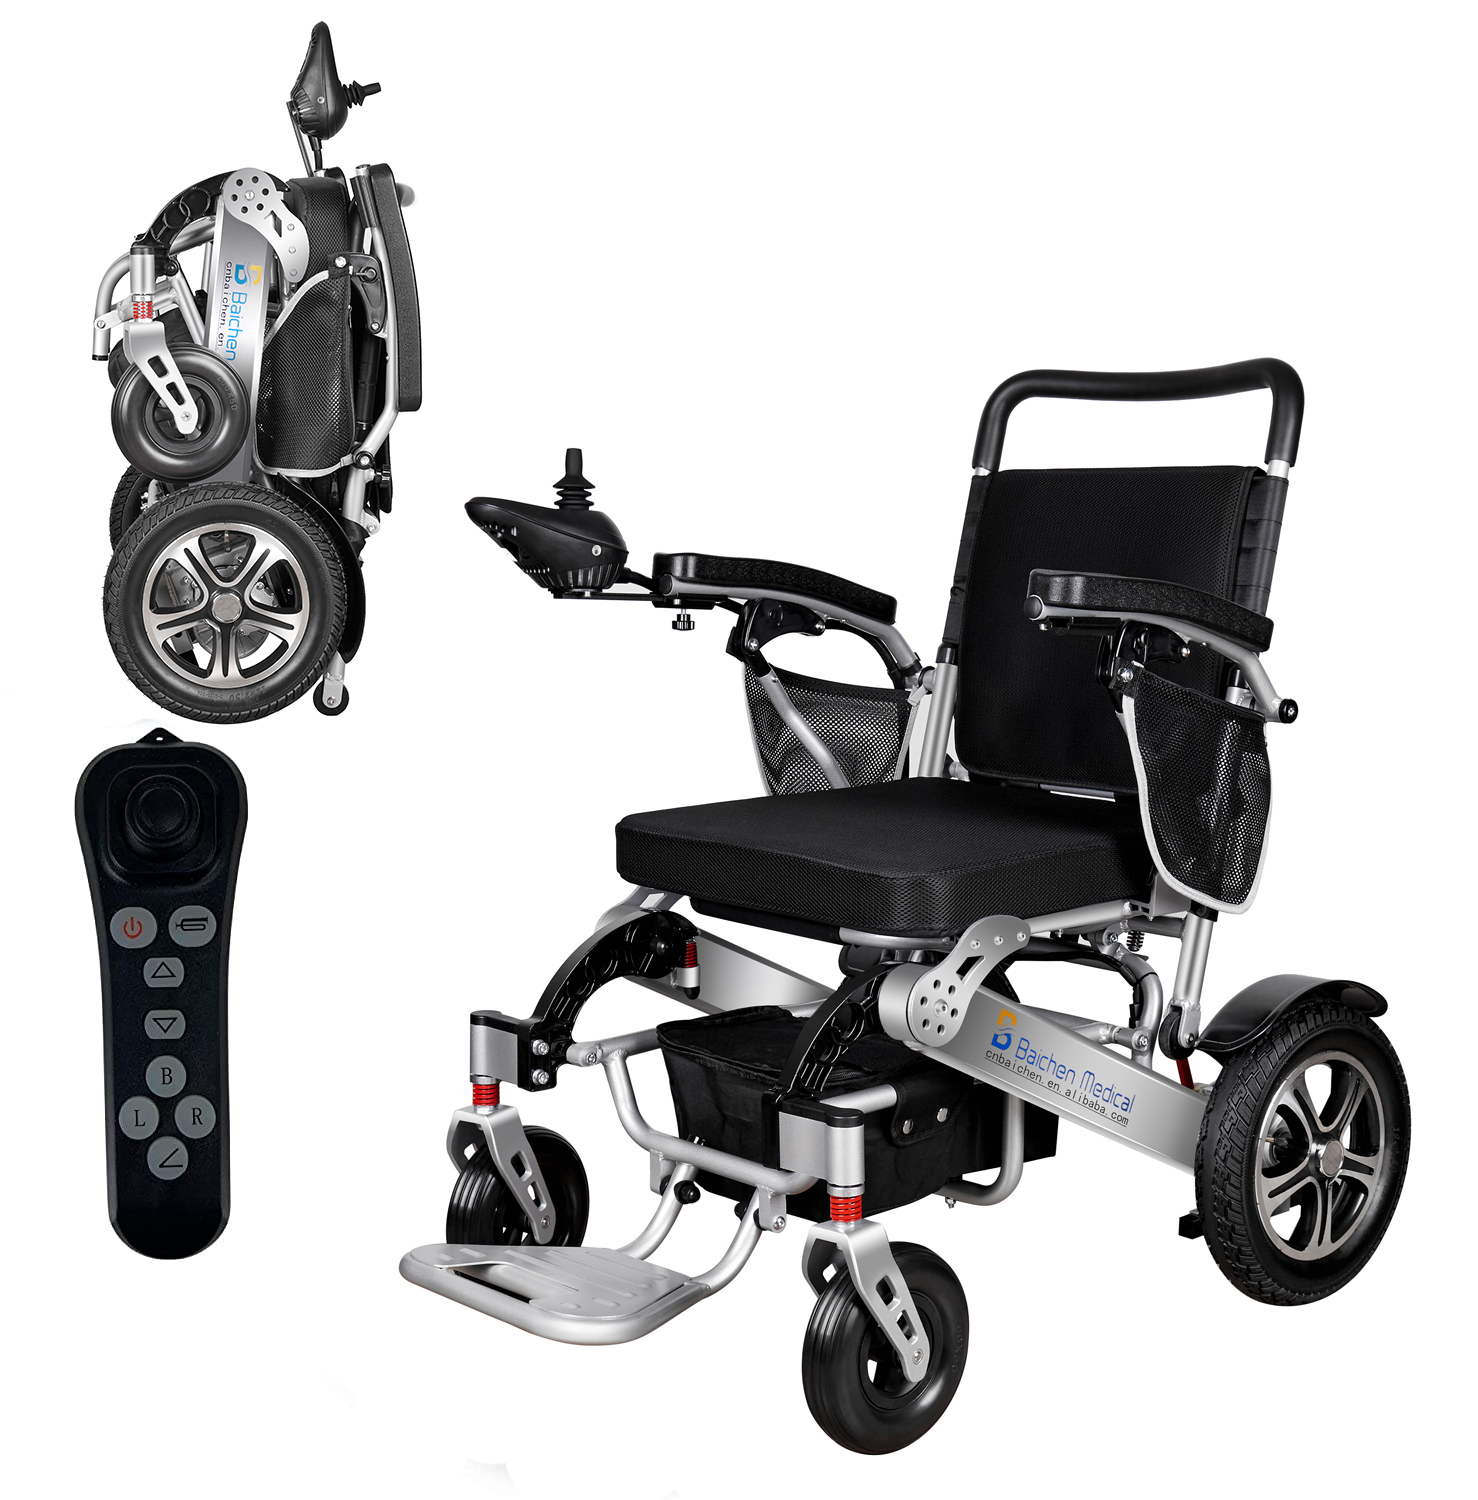 Folding Aluminum Alloy Light Weight and Economical Manual Wheelchair for Handicapped Persons Featured Image